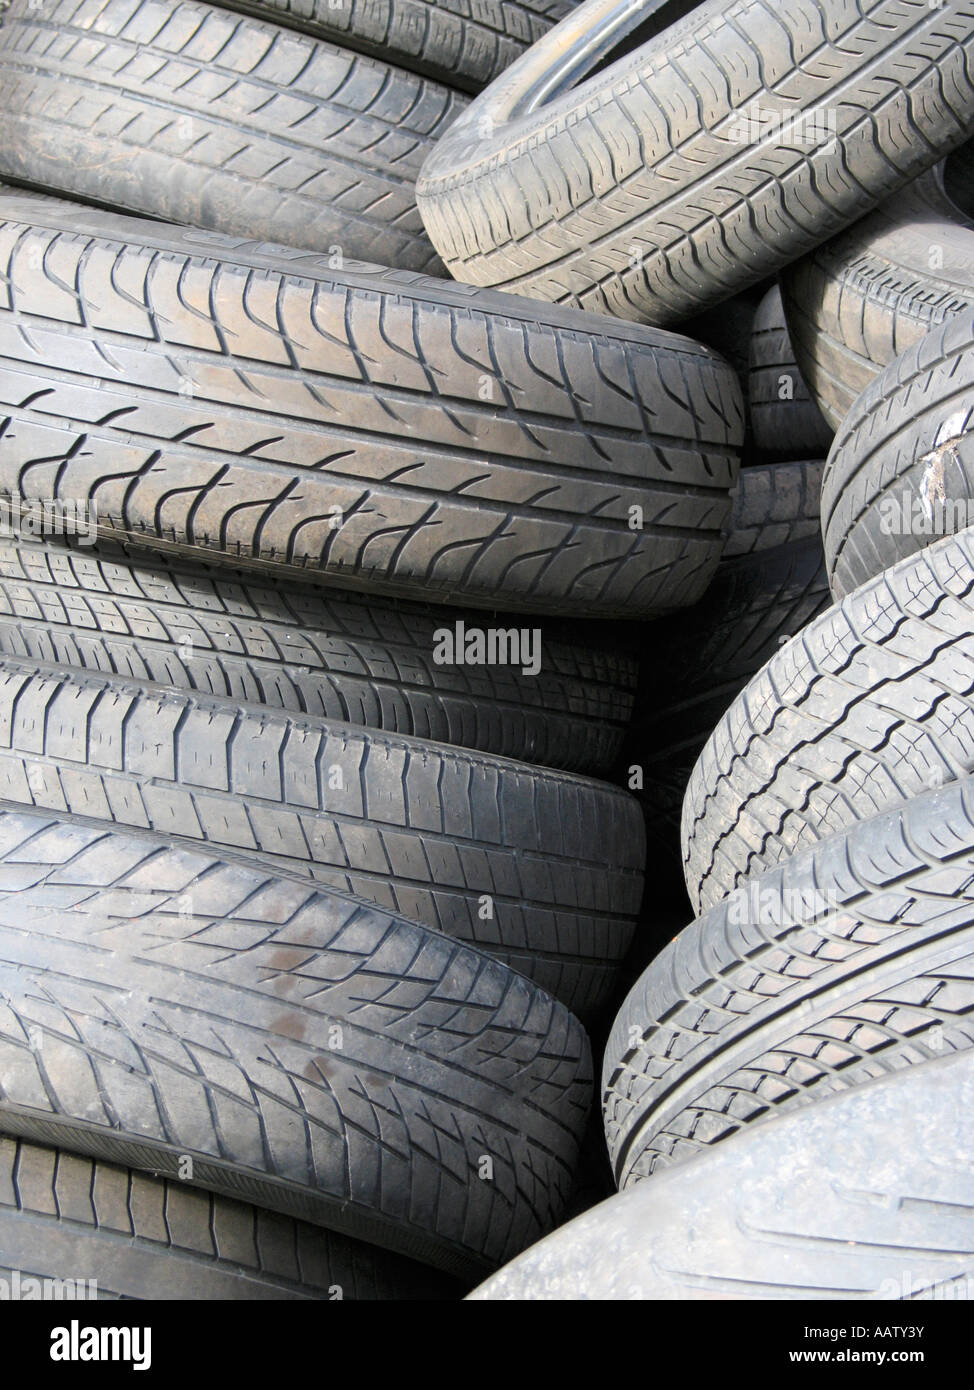 A pile of old car tyres Stock Photo